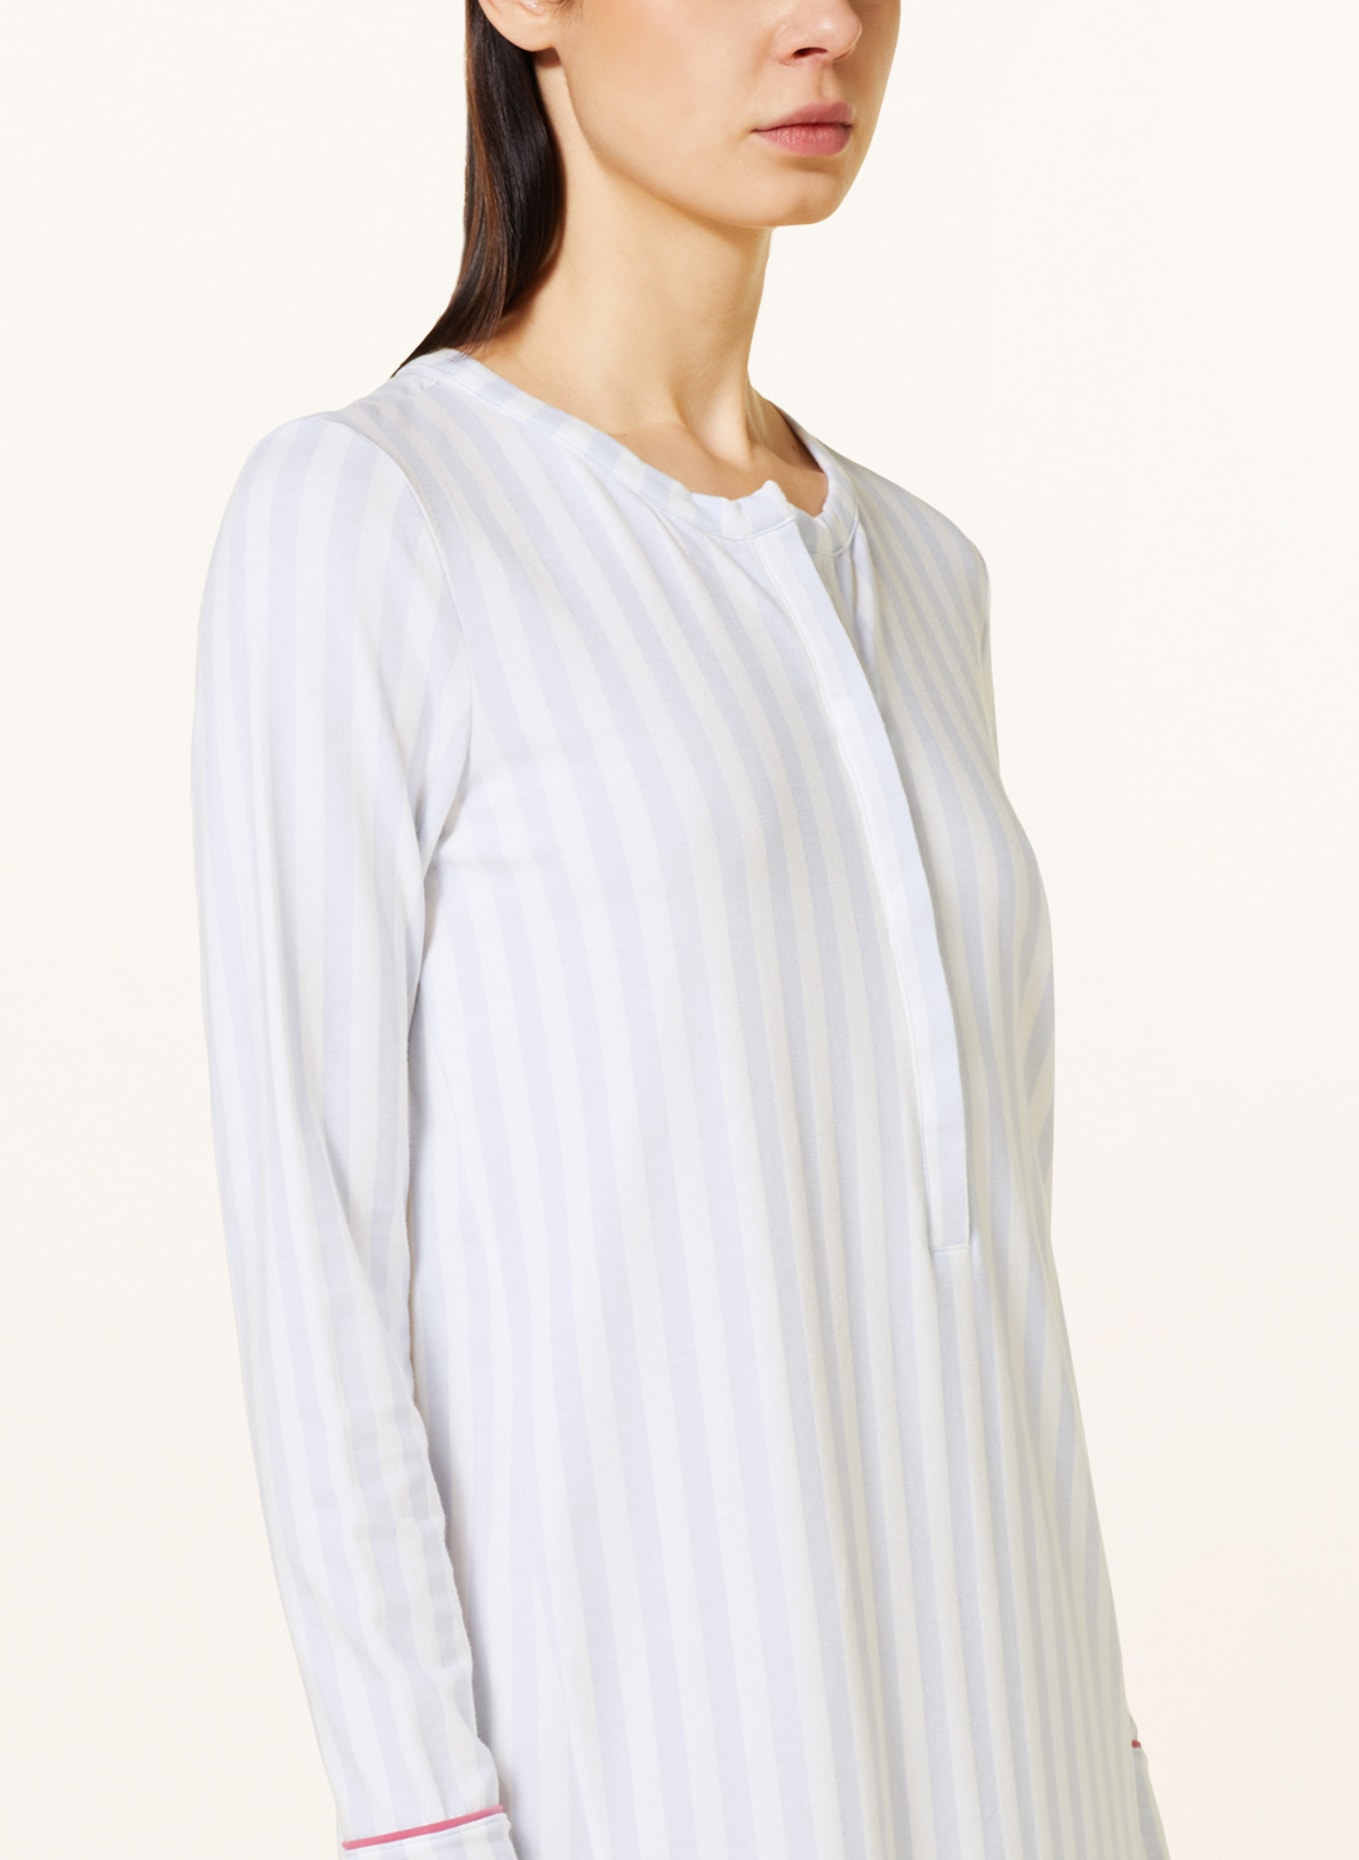 SHORT STORIES Nightgown, Color: LIGHT BLUE/ WHITE (Image 4)